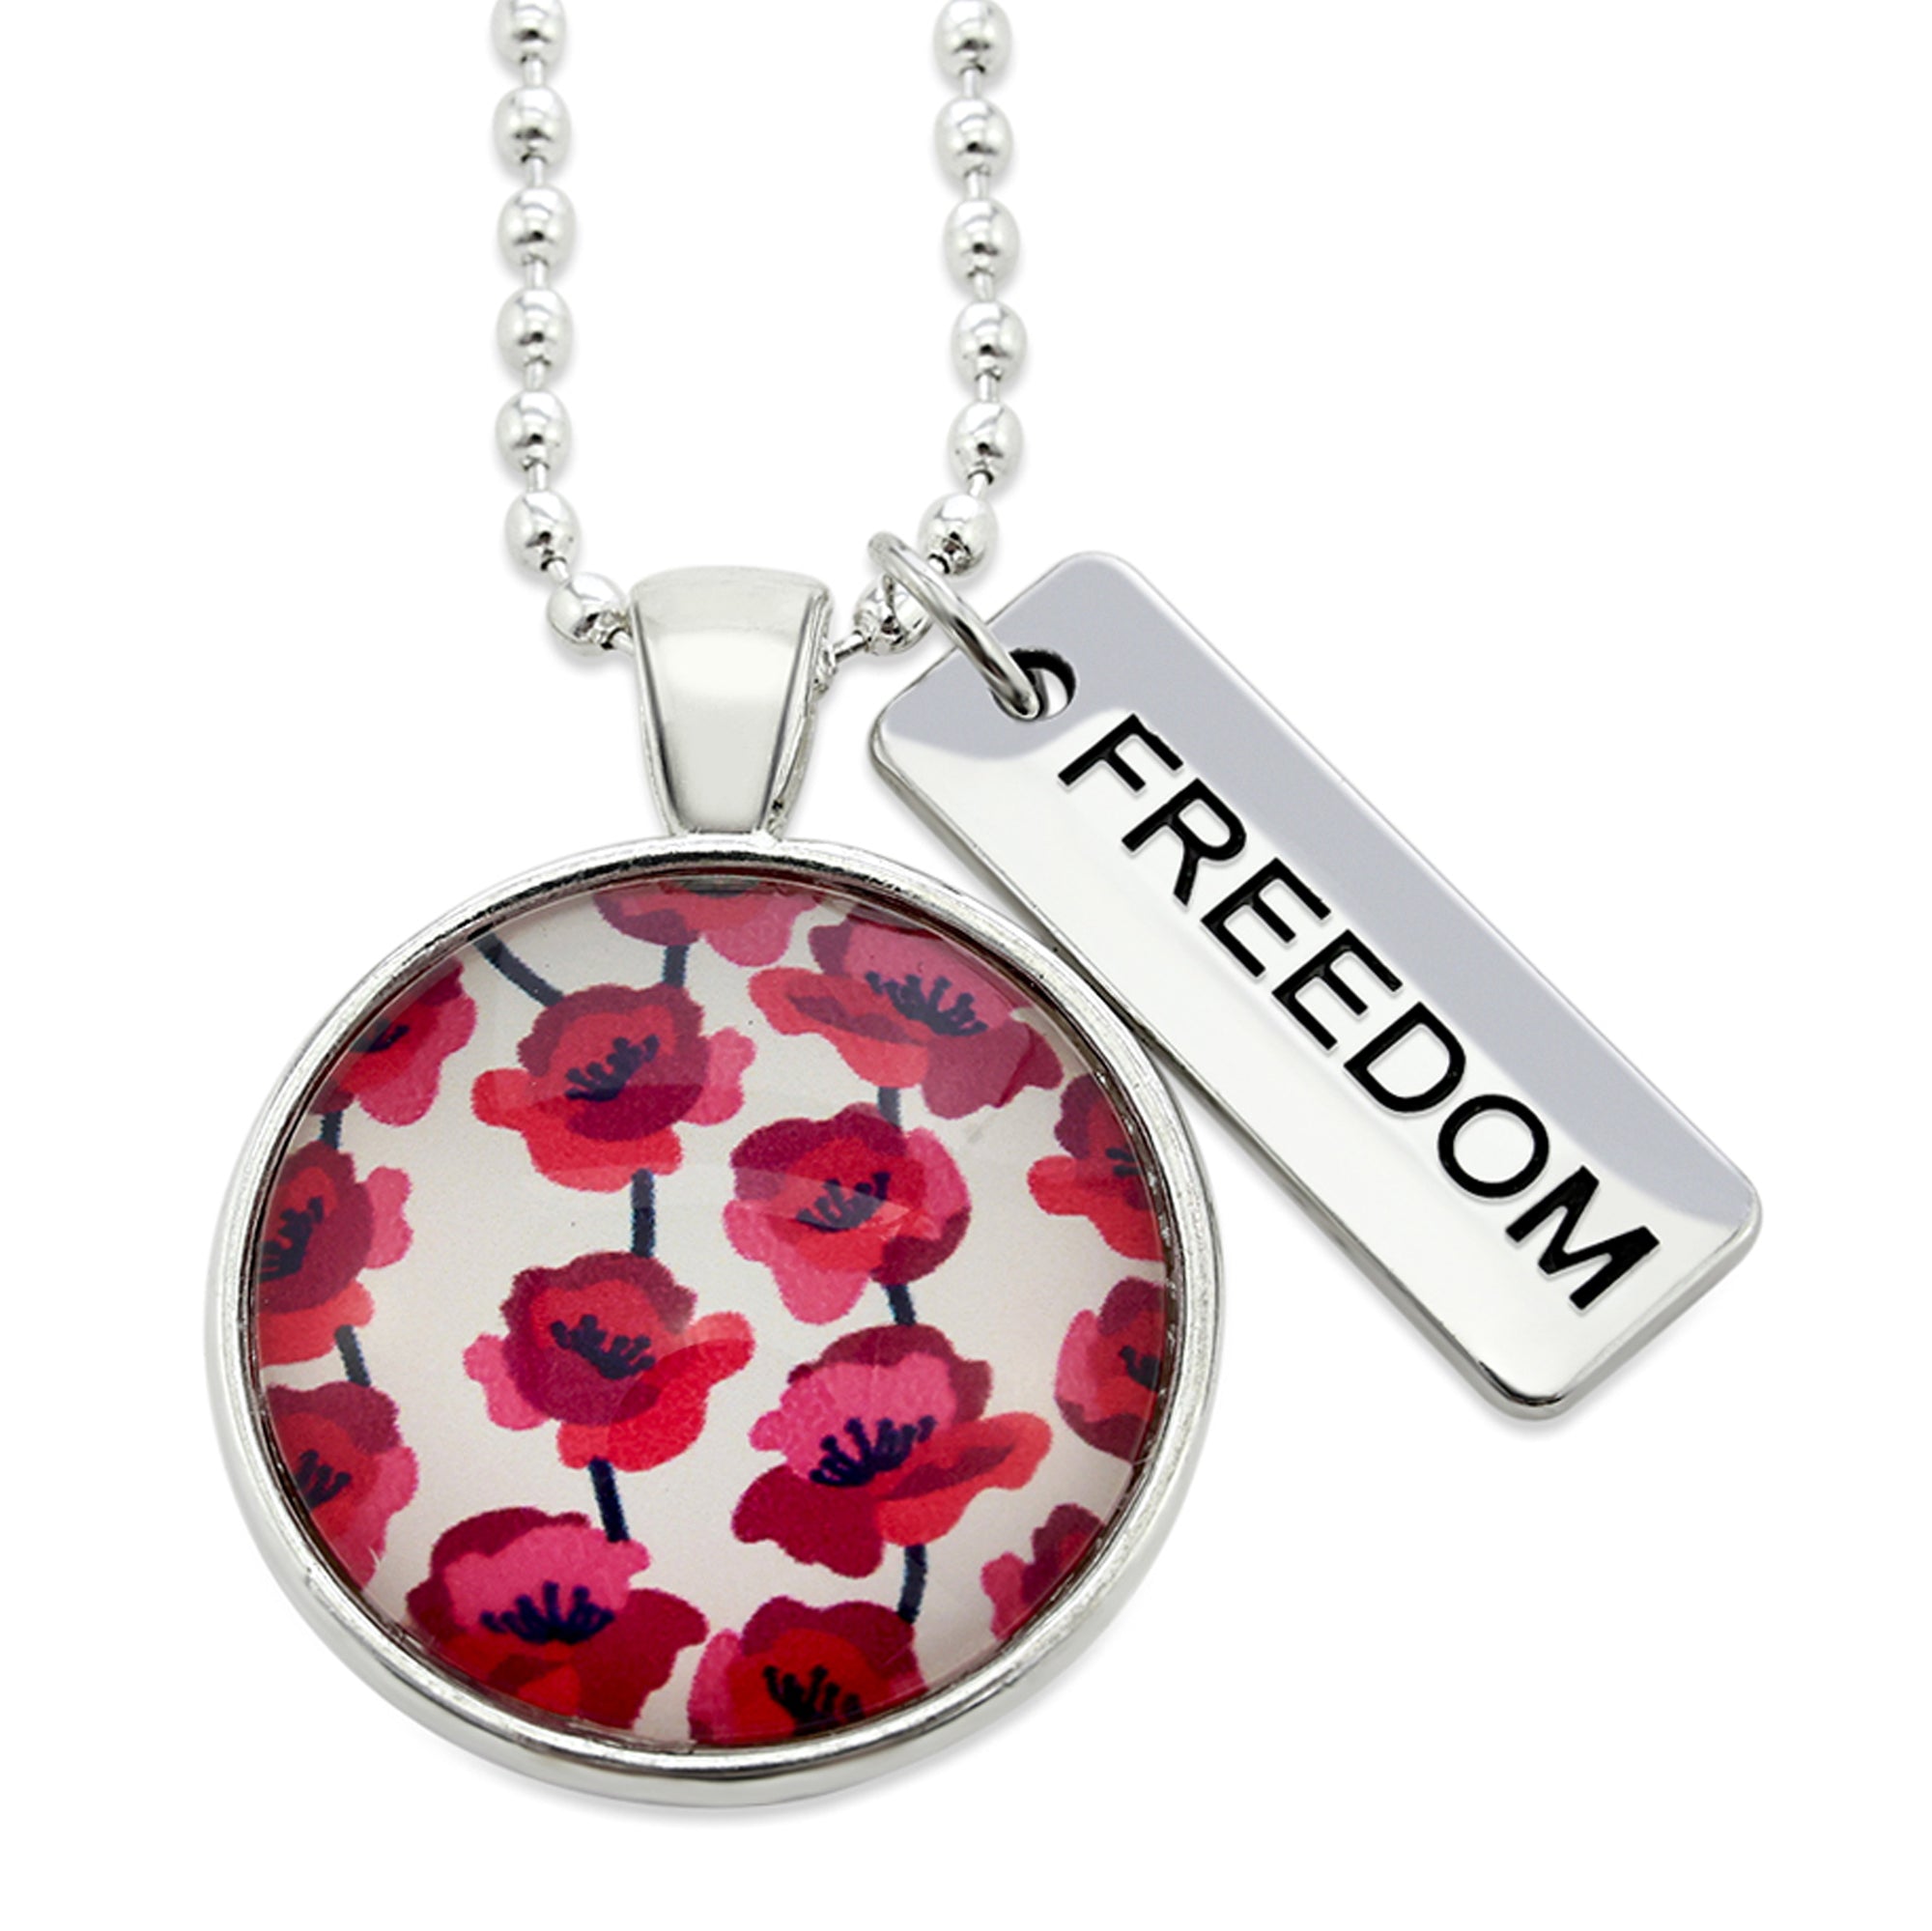 POPPIES Collection - Bright Silver 'FREEDOM' Necklace - Poppies Print (10245)